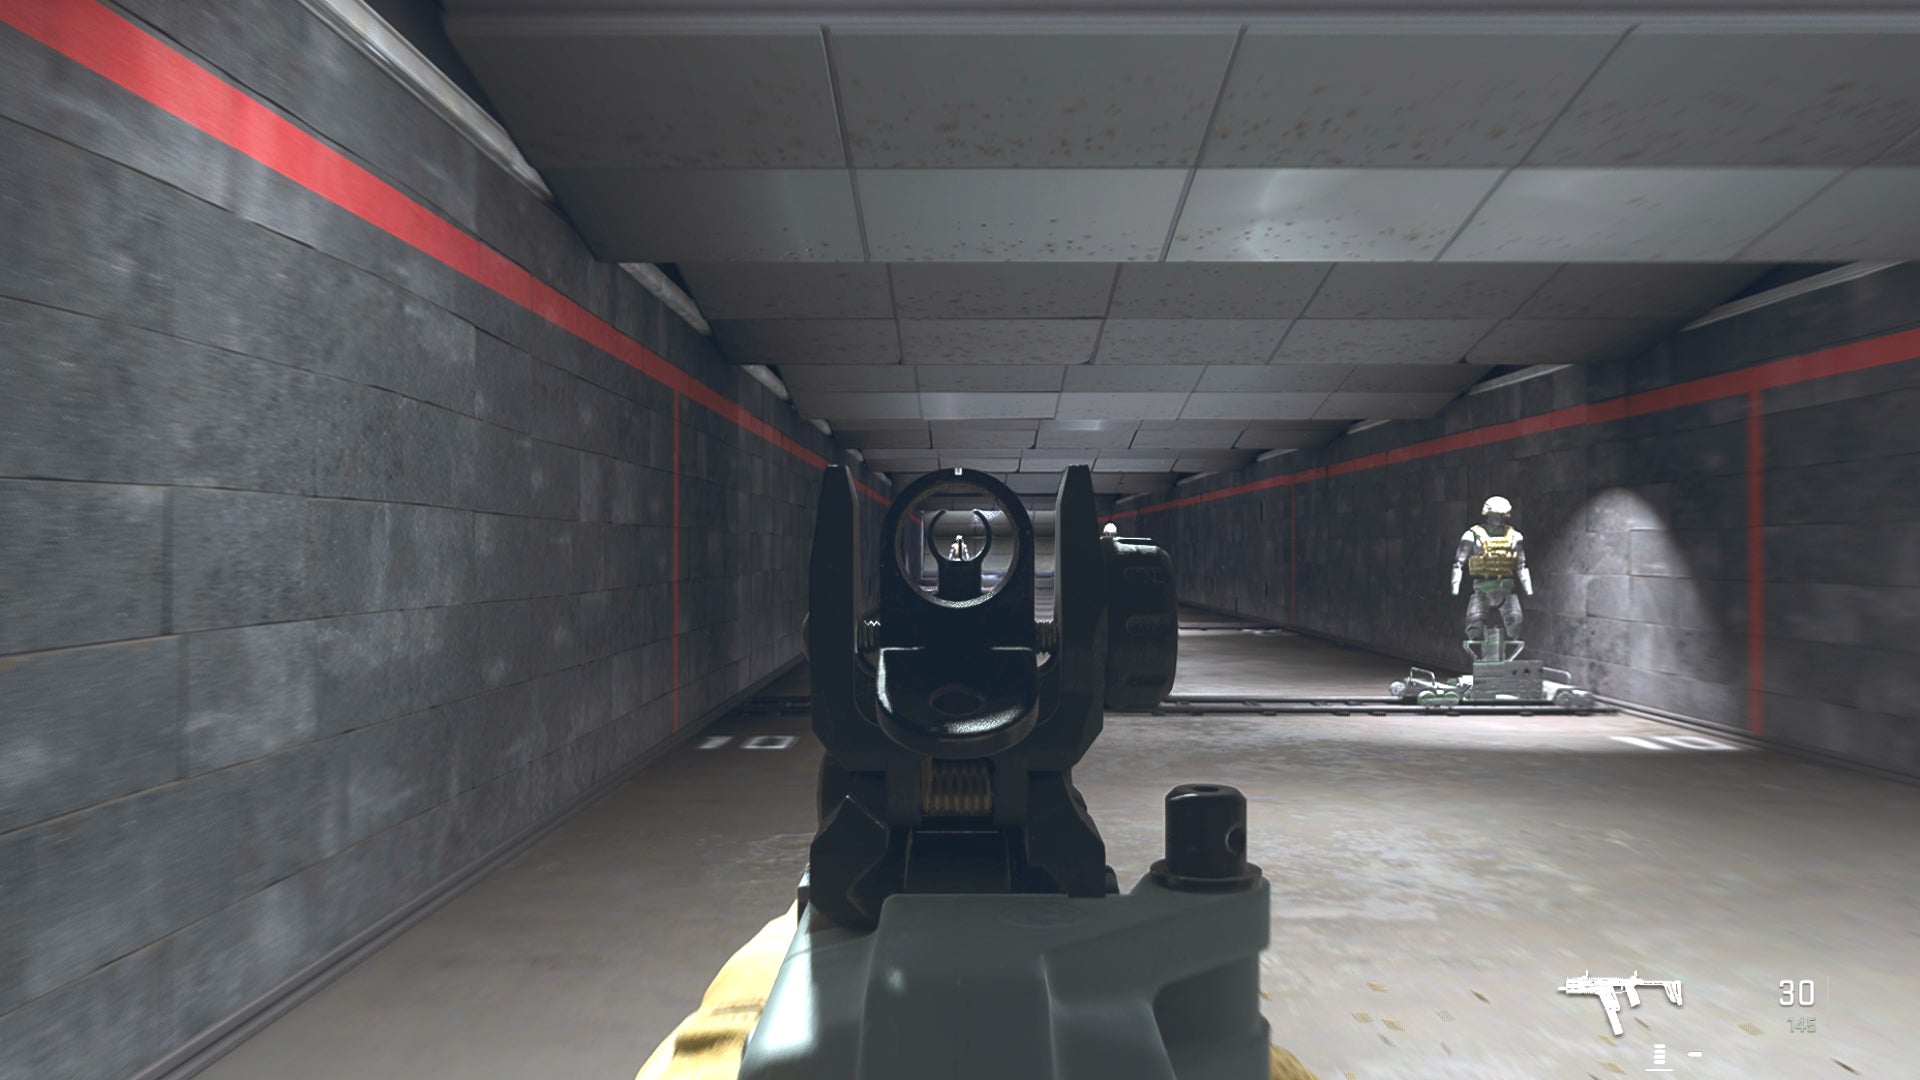 The player in Warzone 2.0 aims at a training dummy with the Fennec 45 ironsights.